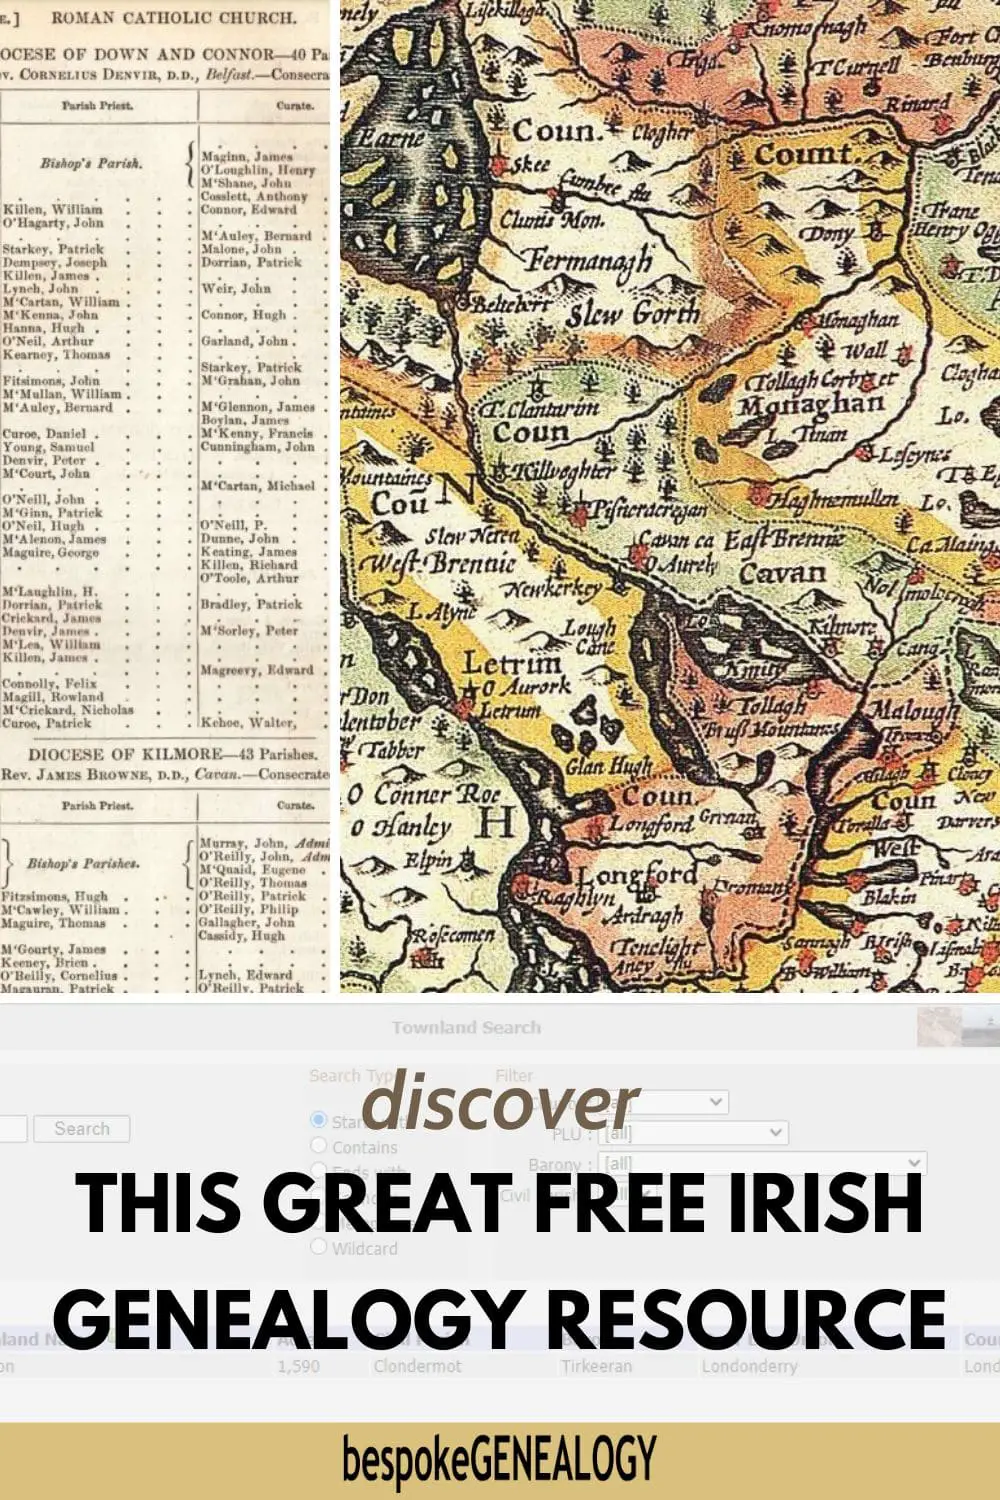 Discover this great free Irish genealogy resource. Image showing part of a historical map and a page from a directory